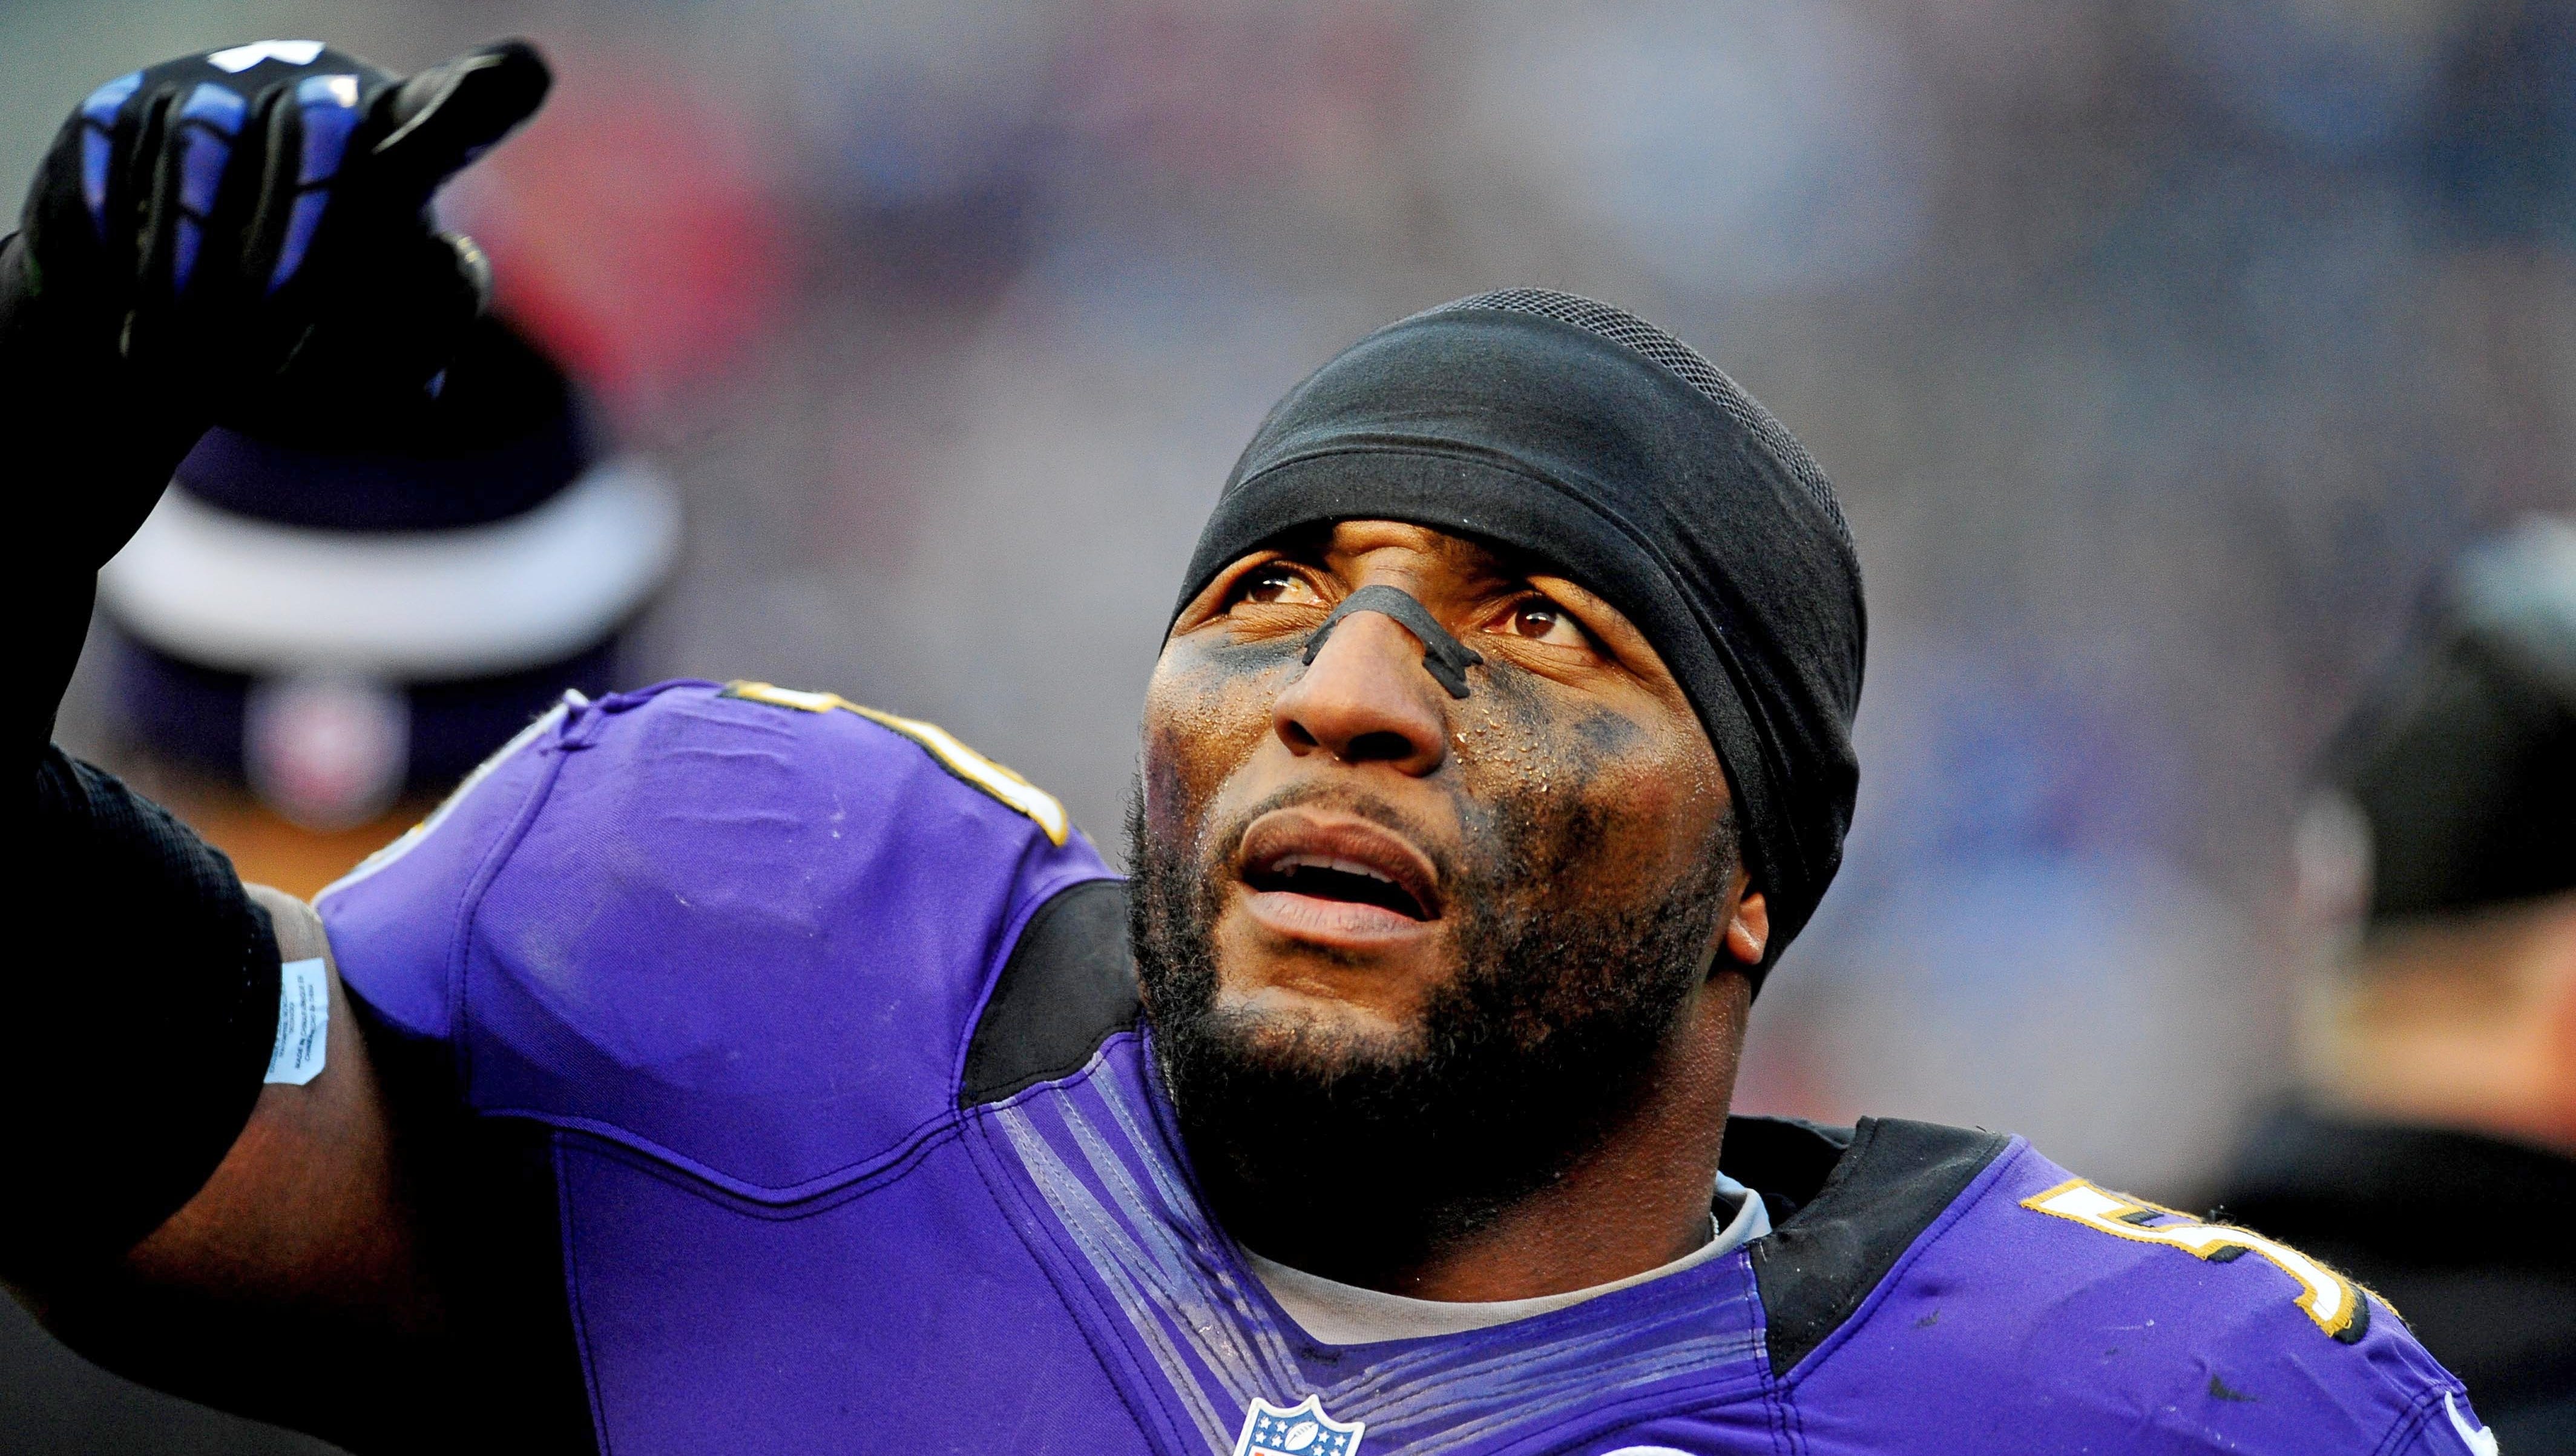 Ray Lewis – we’ll never know what really happened, but I think he’s guiltier than he’s led us to believe.